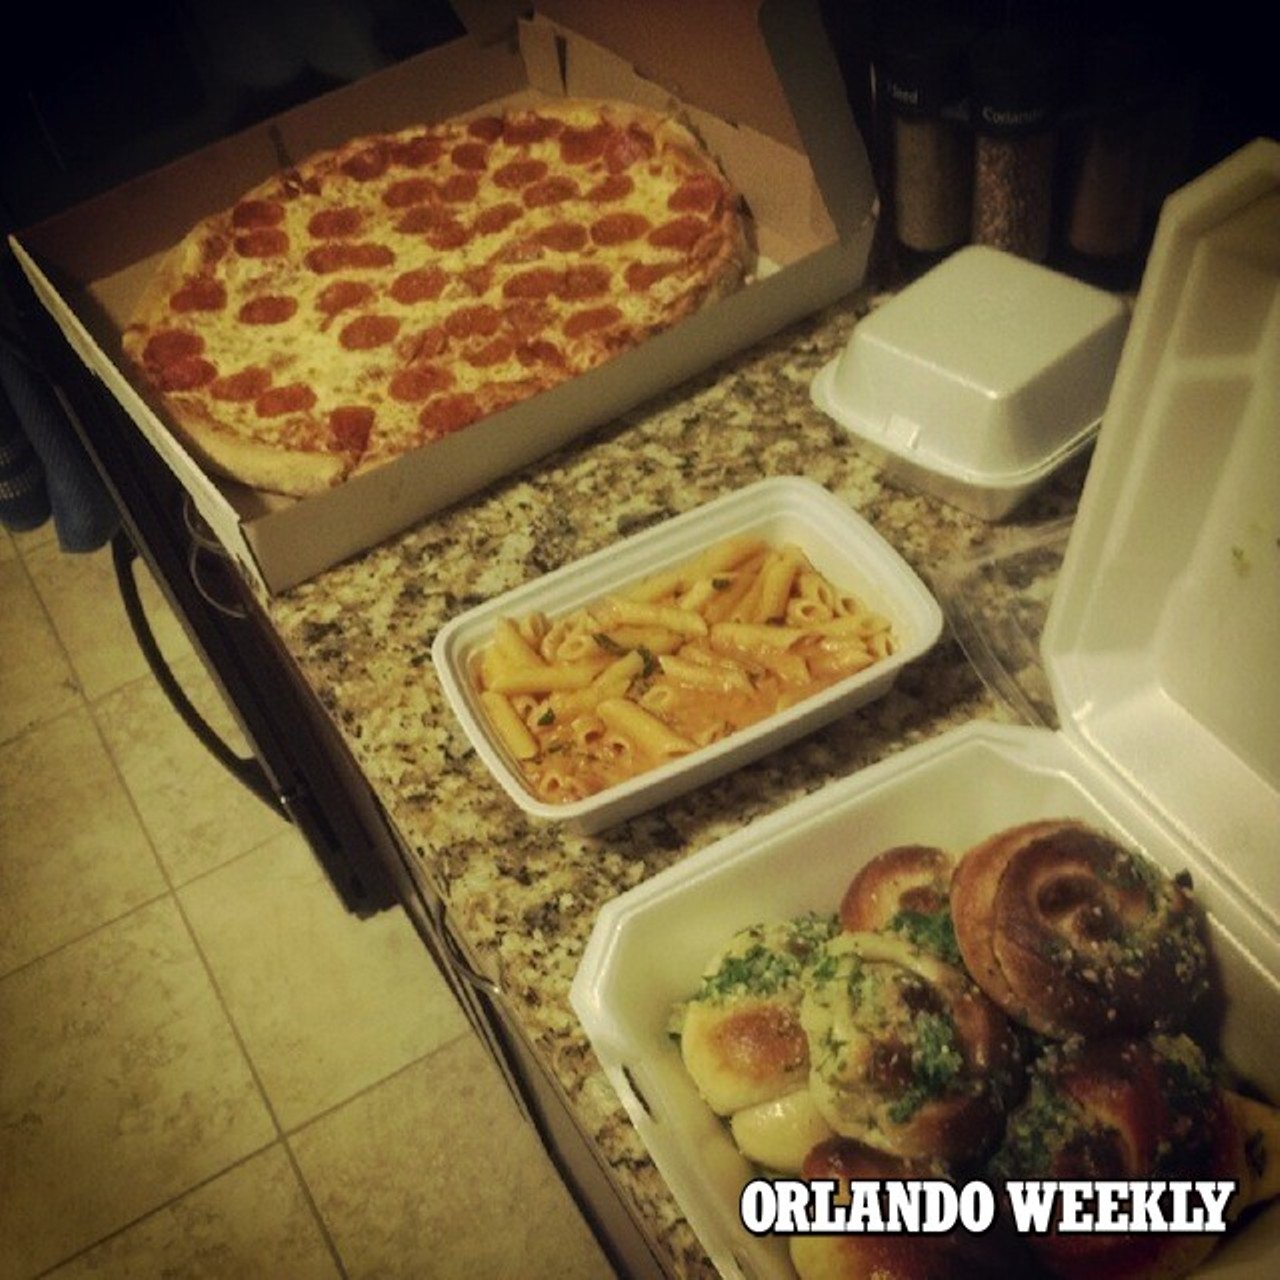 Or maybe you decided to eat in. Say, takeout from Dominick's in Winter Springs.